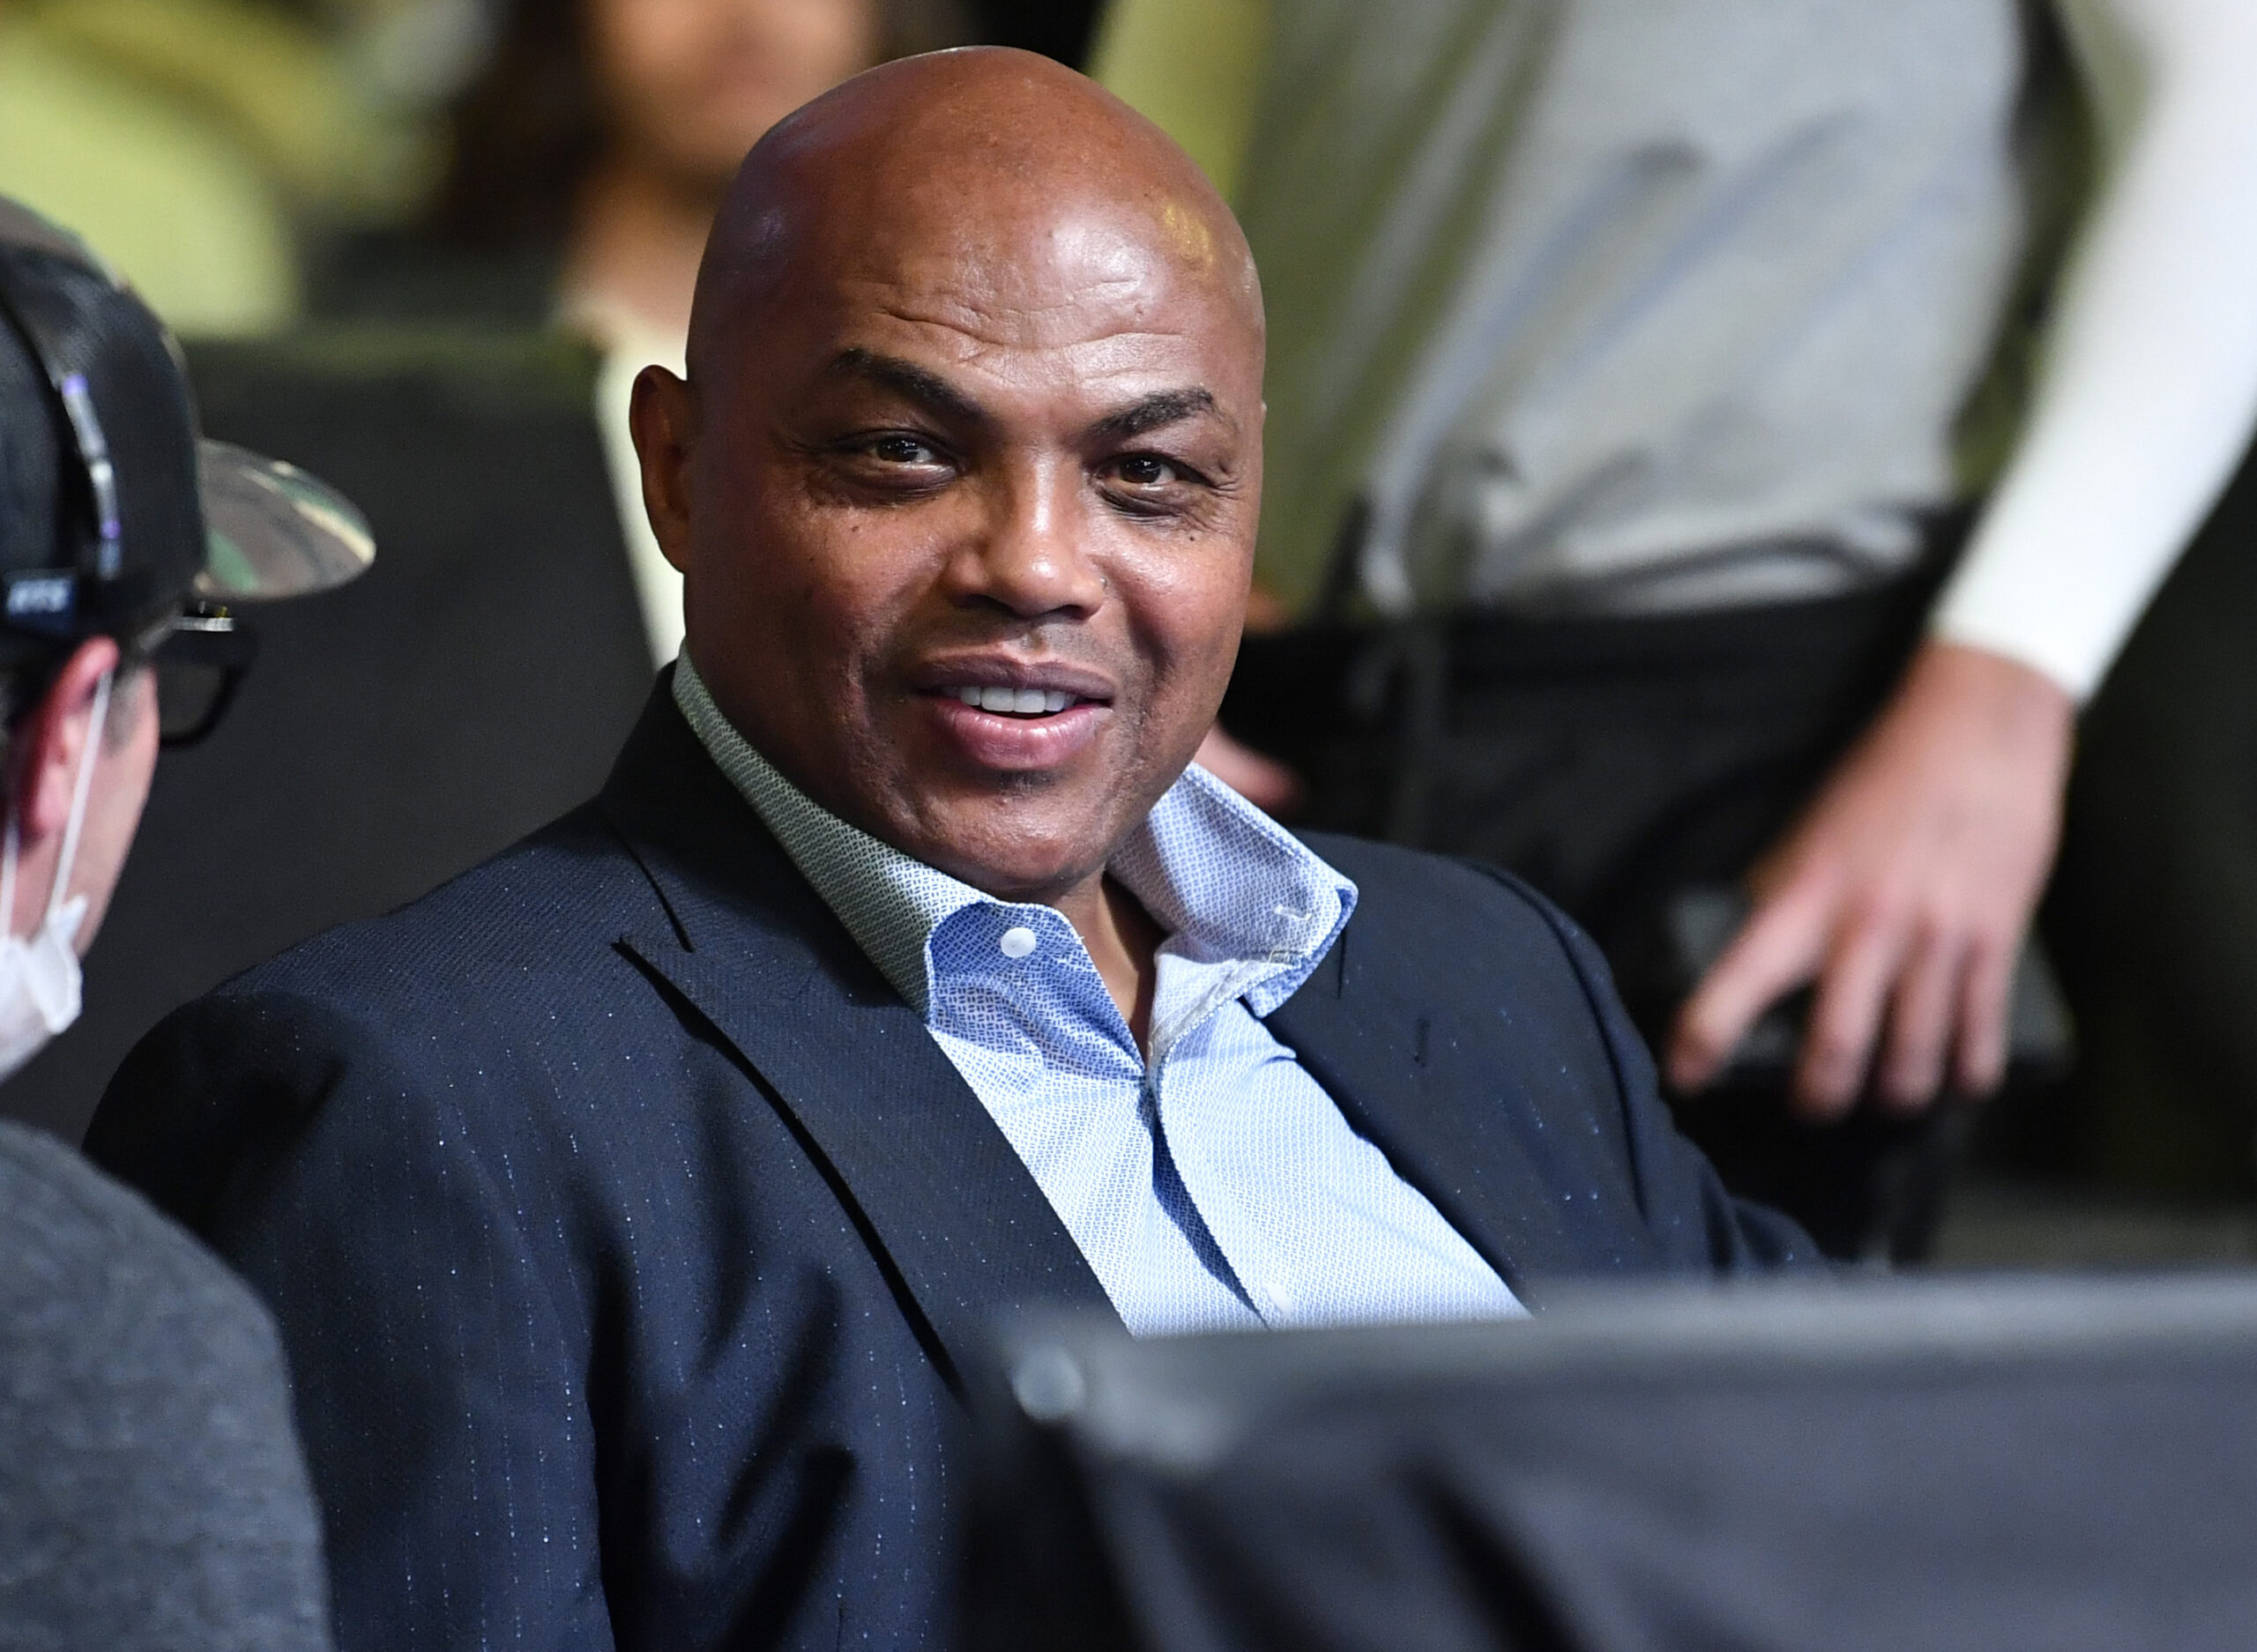 Charles Barkley says if he was Jimmy Kimmel, he would punch Aaron Rodgers in the face.